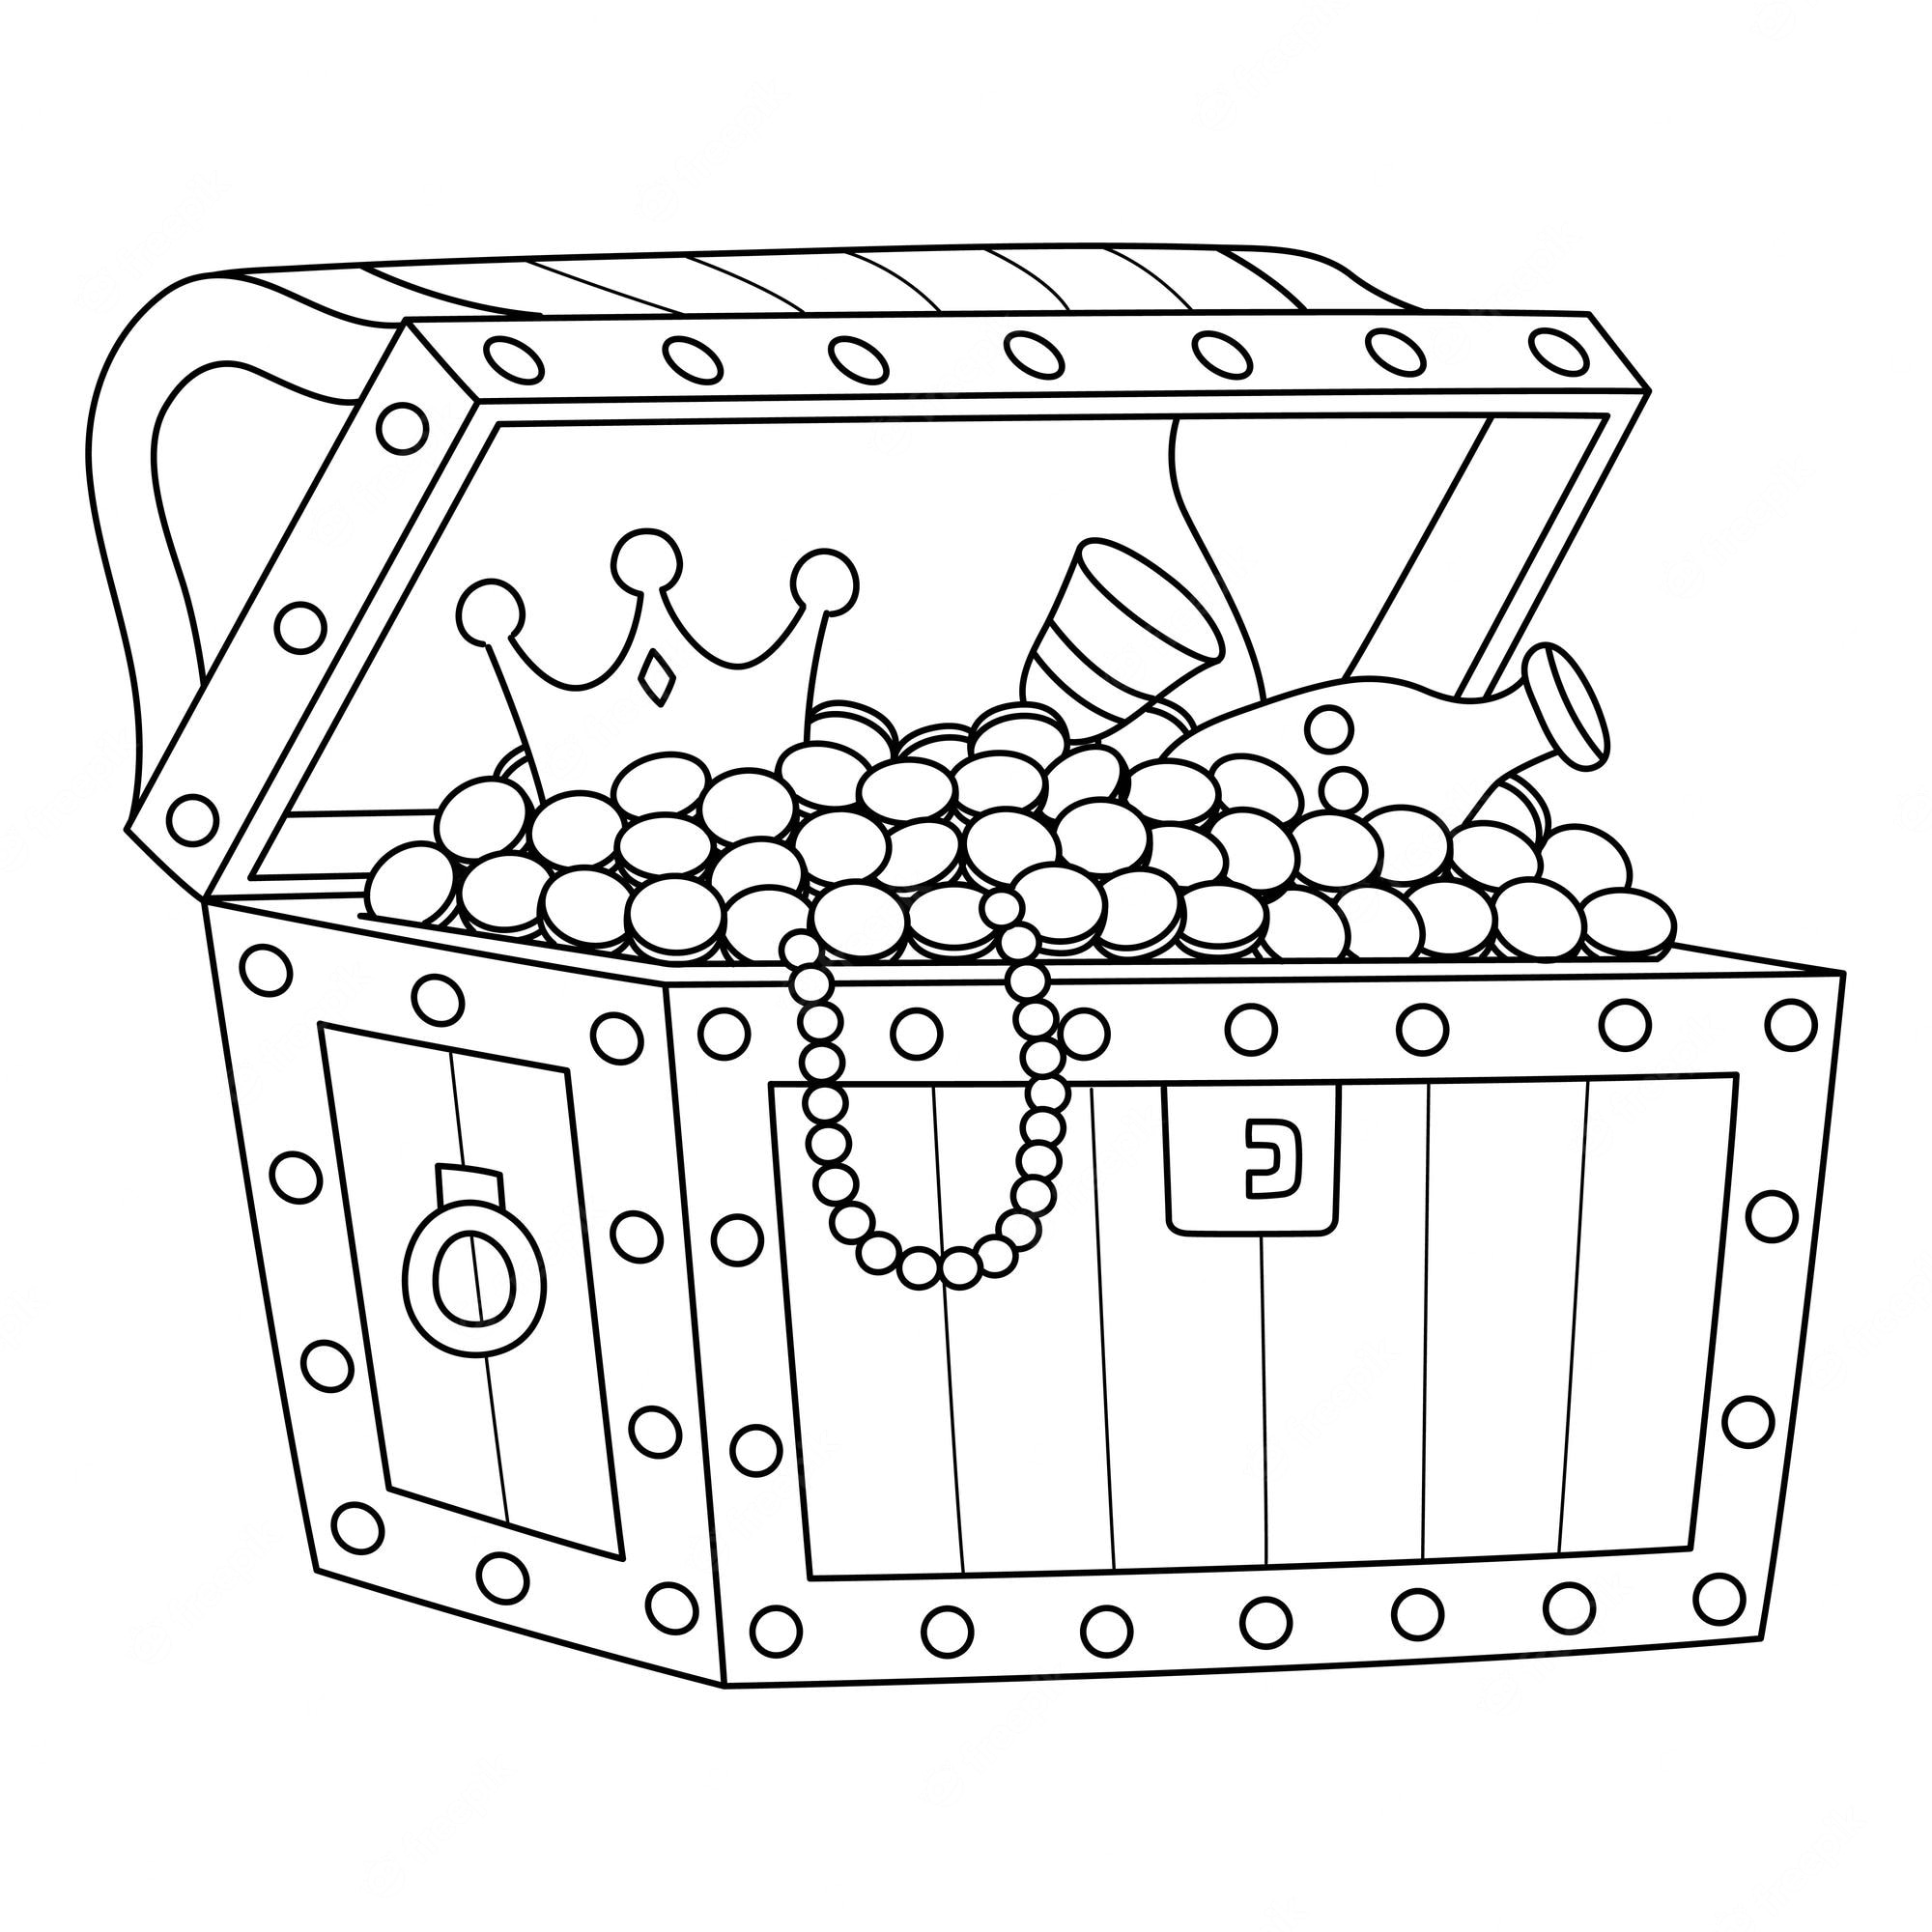 Premium Vector | Big treasure chest coloring page isolated for kids